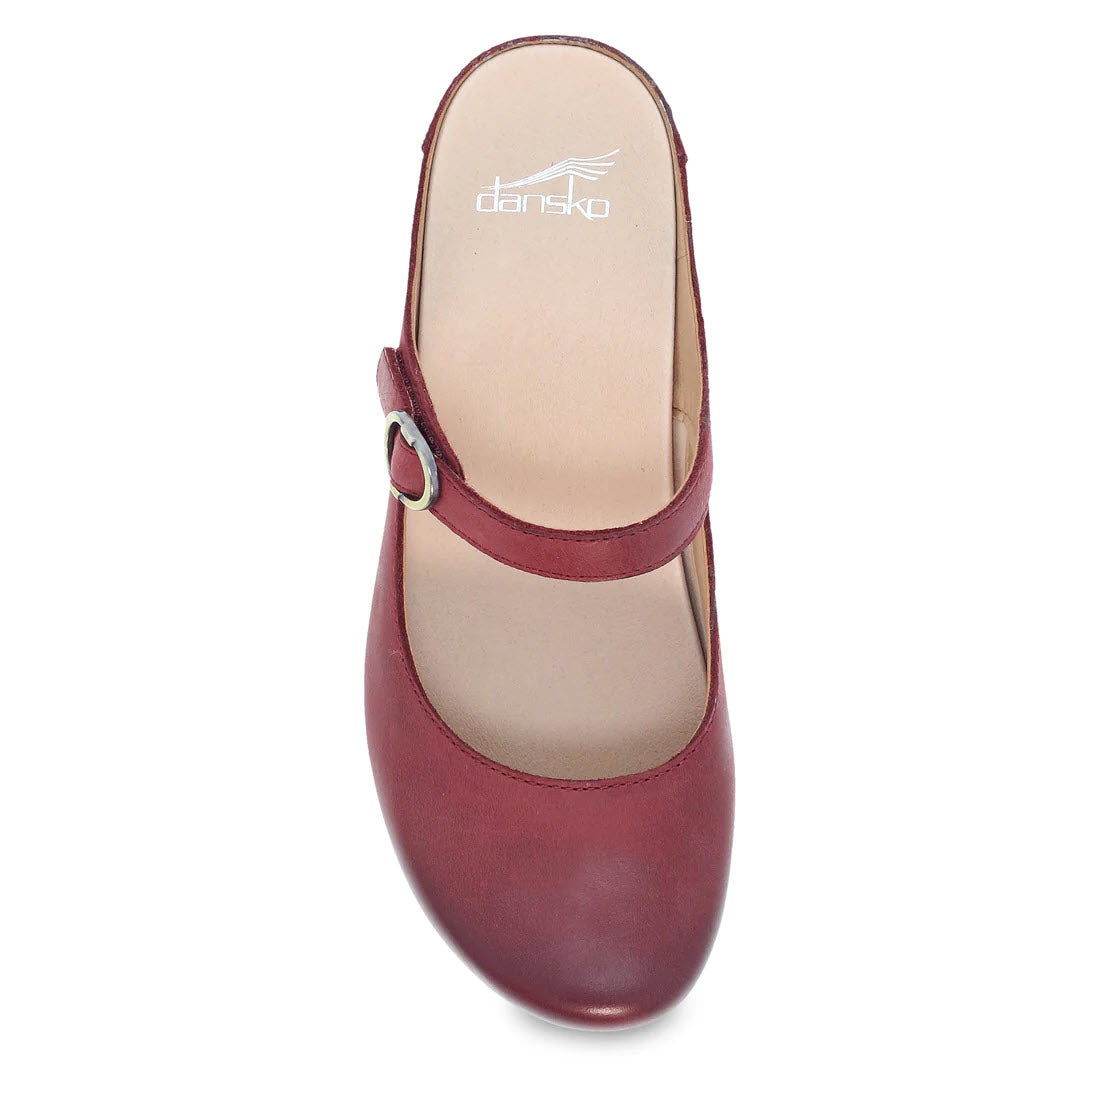 A top view of a single cinnabar Dansko Bria Mary Jane clog mule with an adjustable strap and rounded toe.